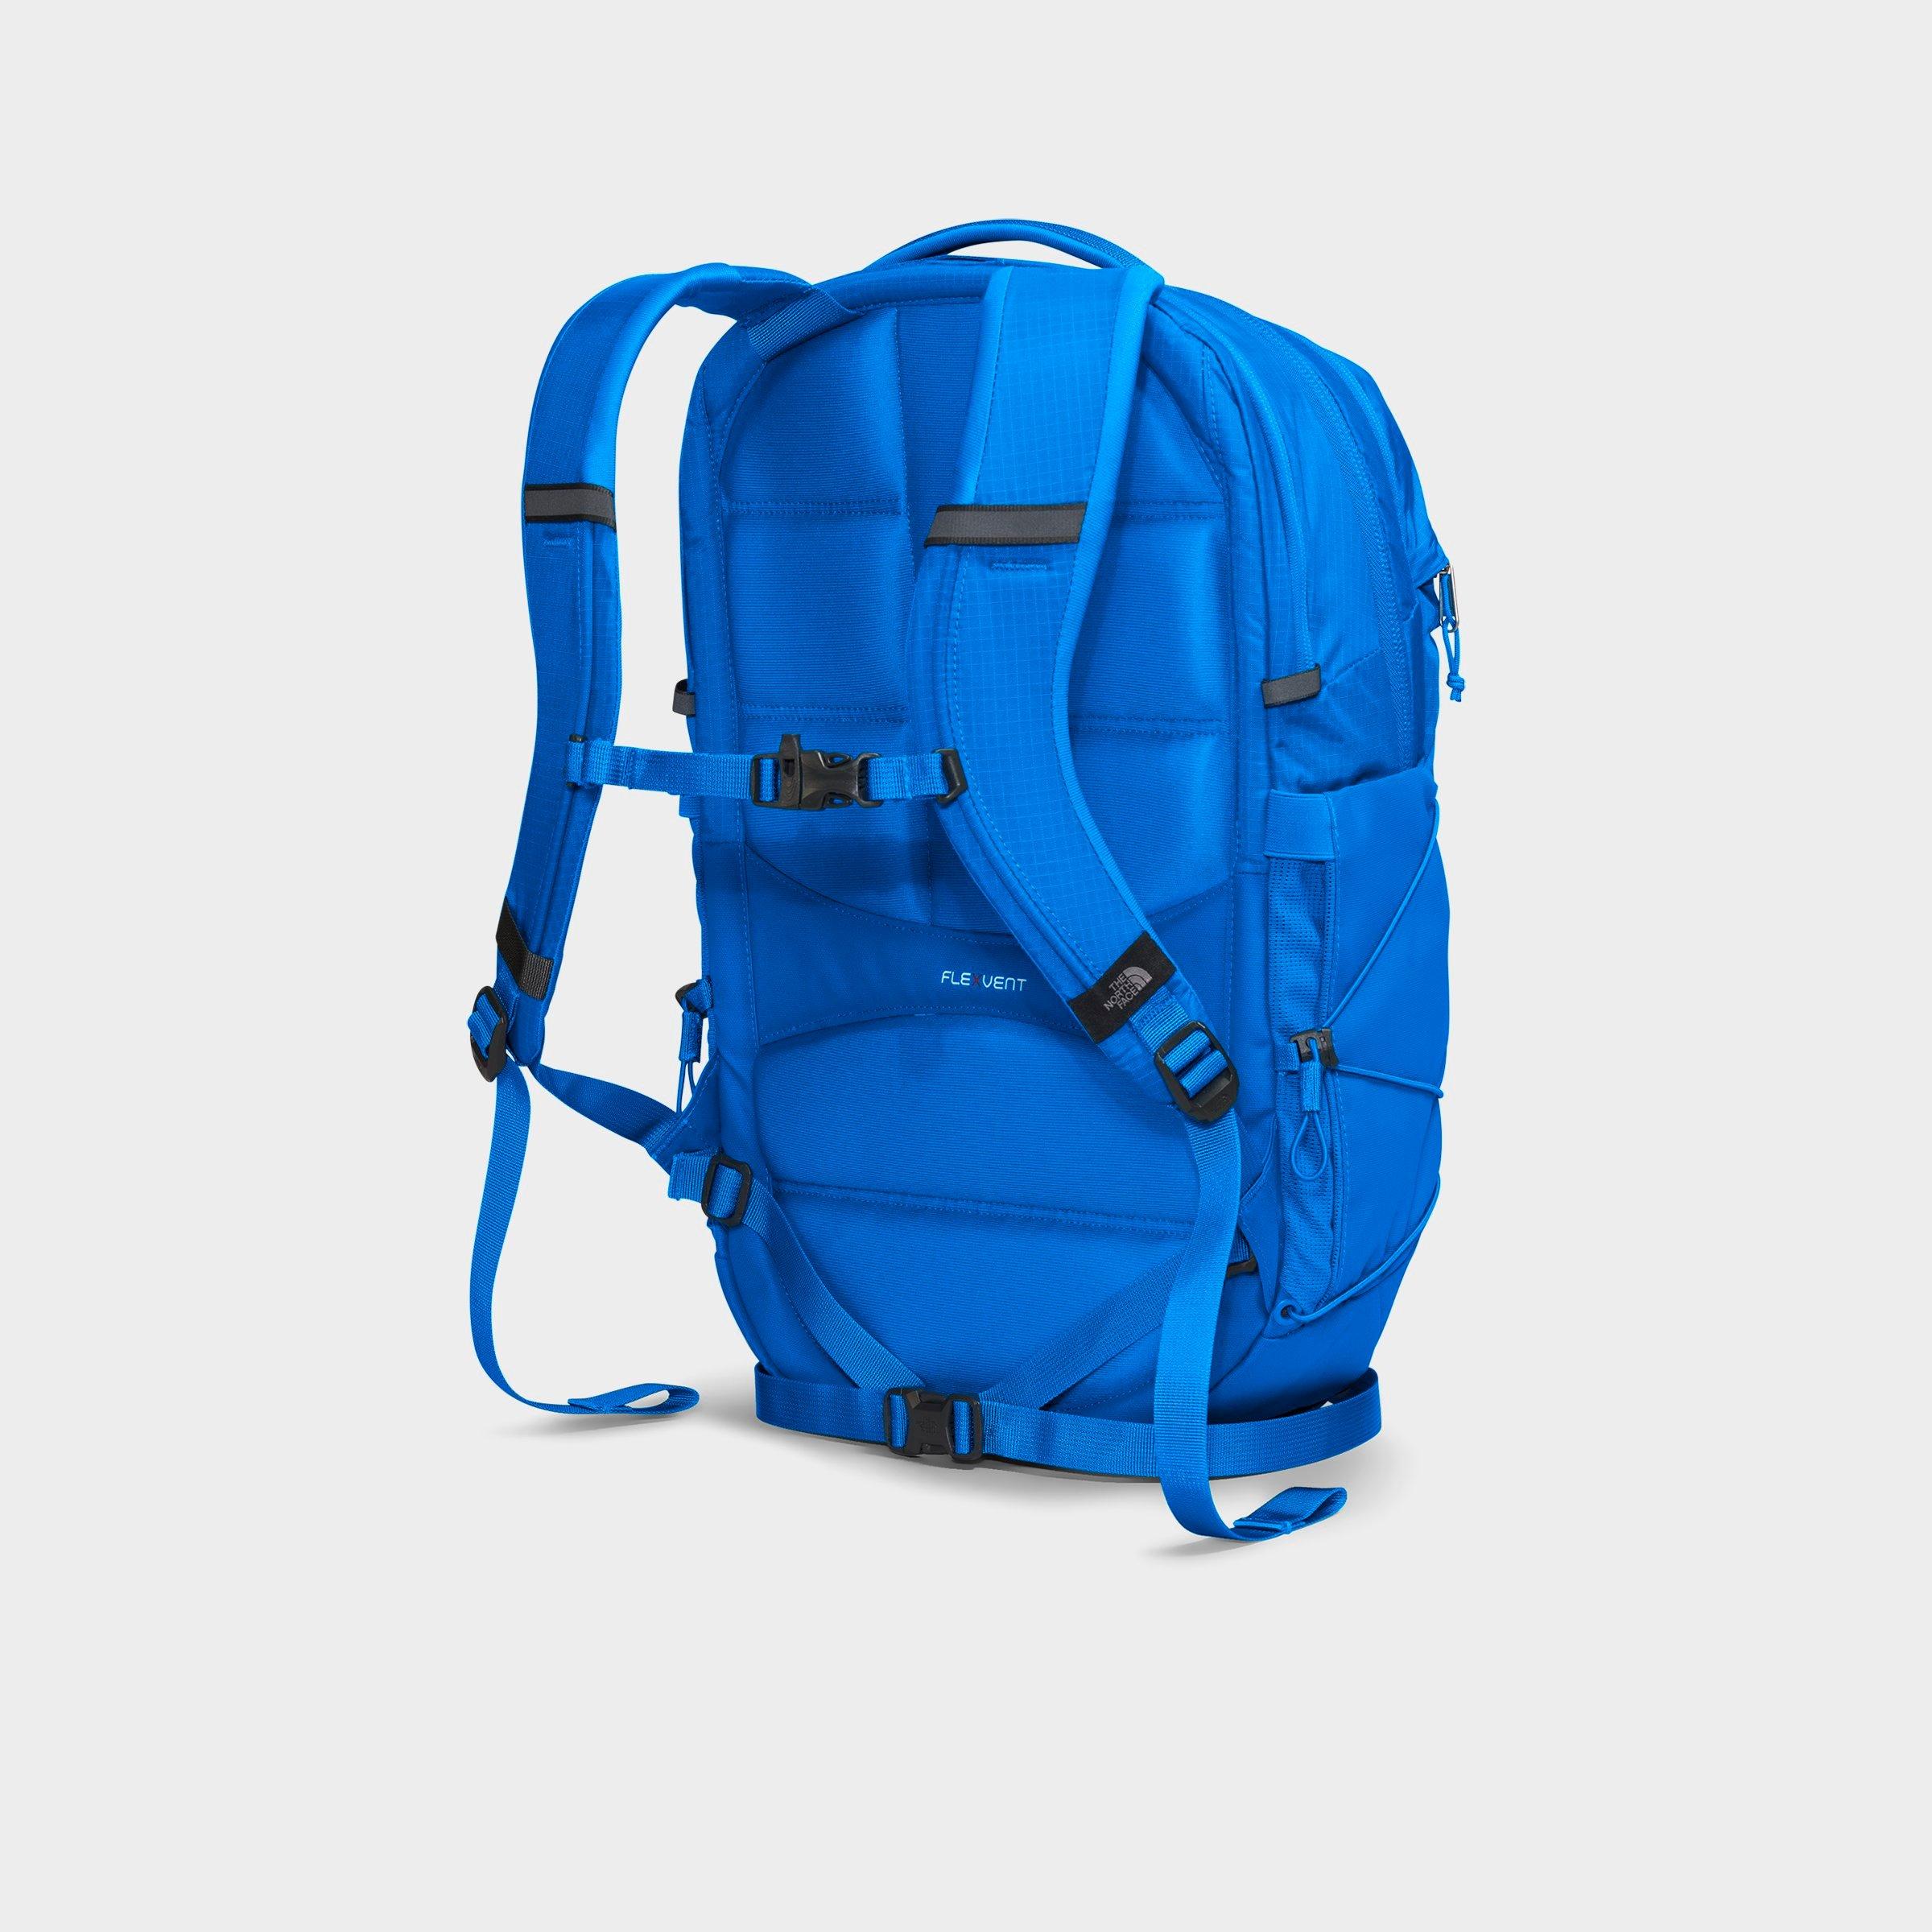 The North Face Women's Borealis Luxe Backpack Optic Blue